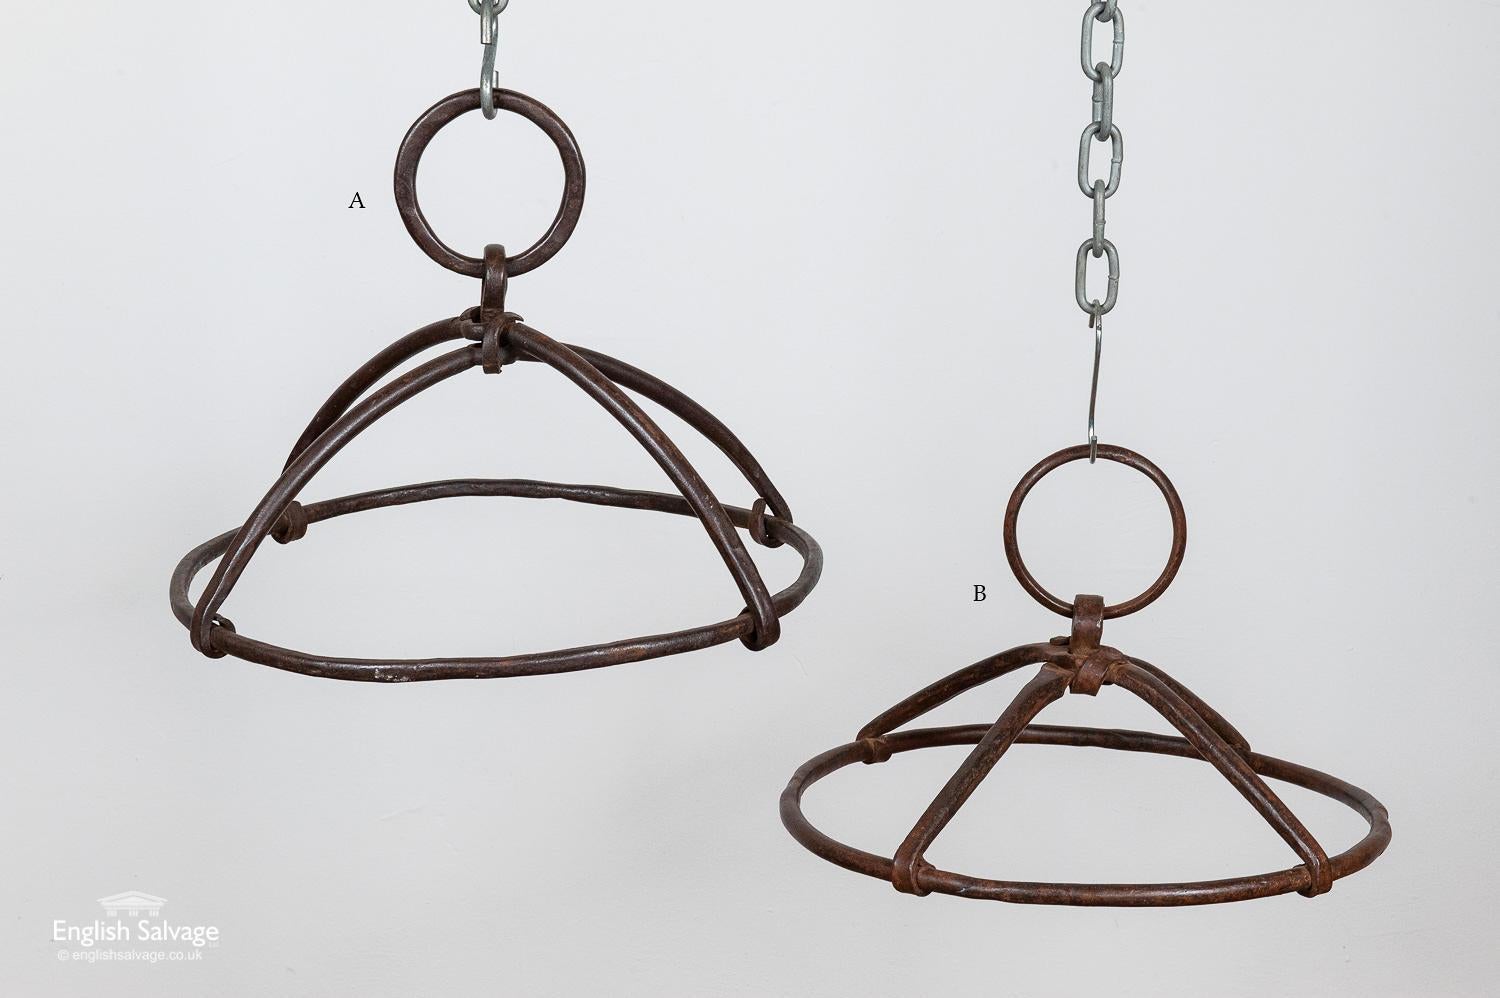 These vintage rustic iron ceiling hangers could serve a multitude of uses, in the kitchen, garden or in a retail setting. They are made from sturdy wrought iron and have a well-weathered finish. 'A' is sold. 'B' measures: 41cm diameter x 17cm high